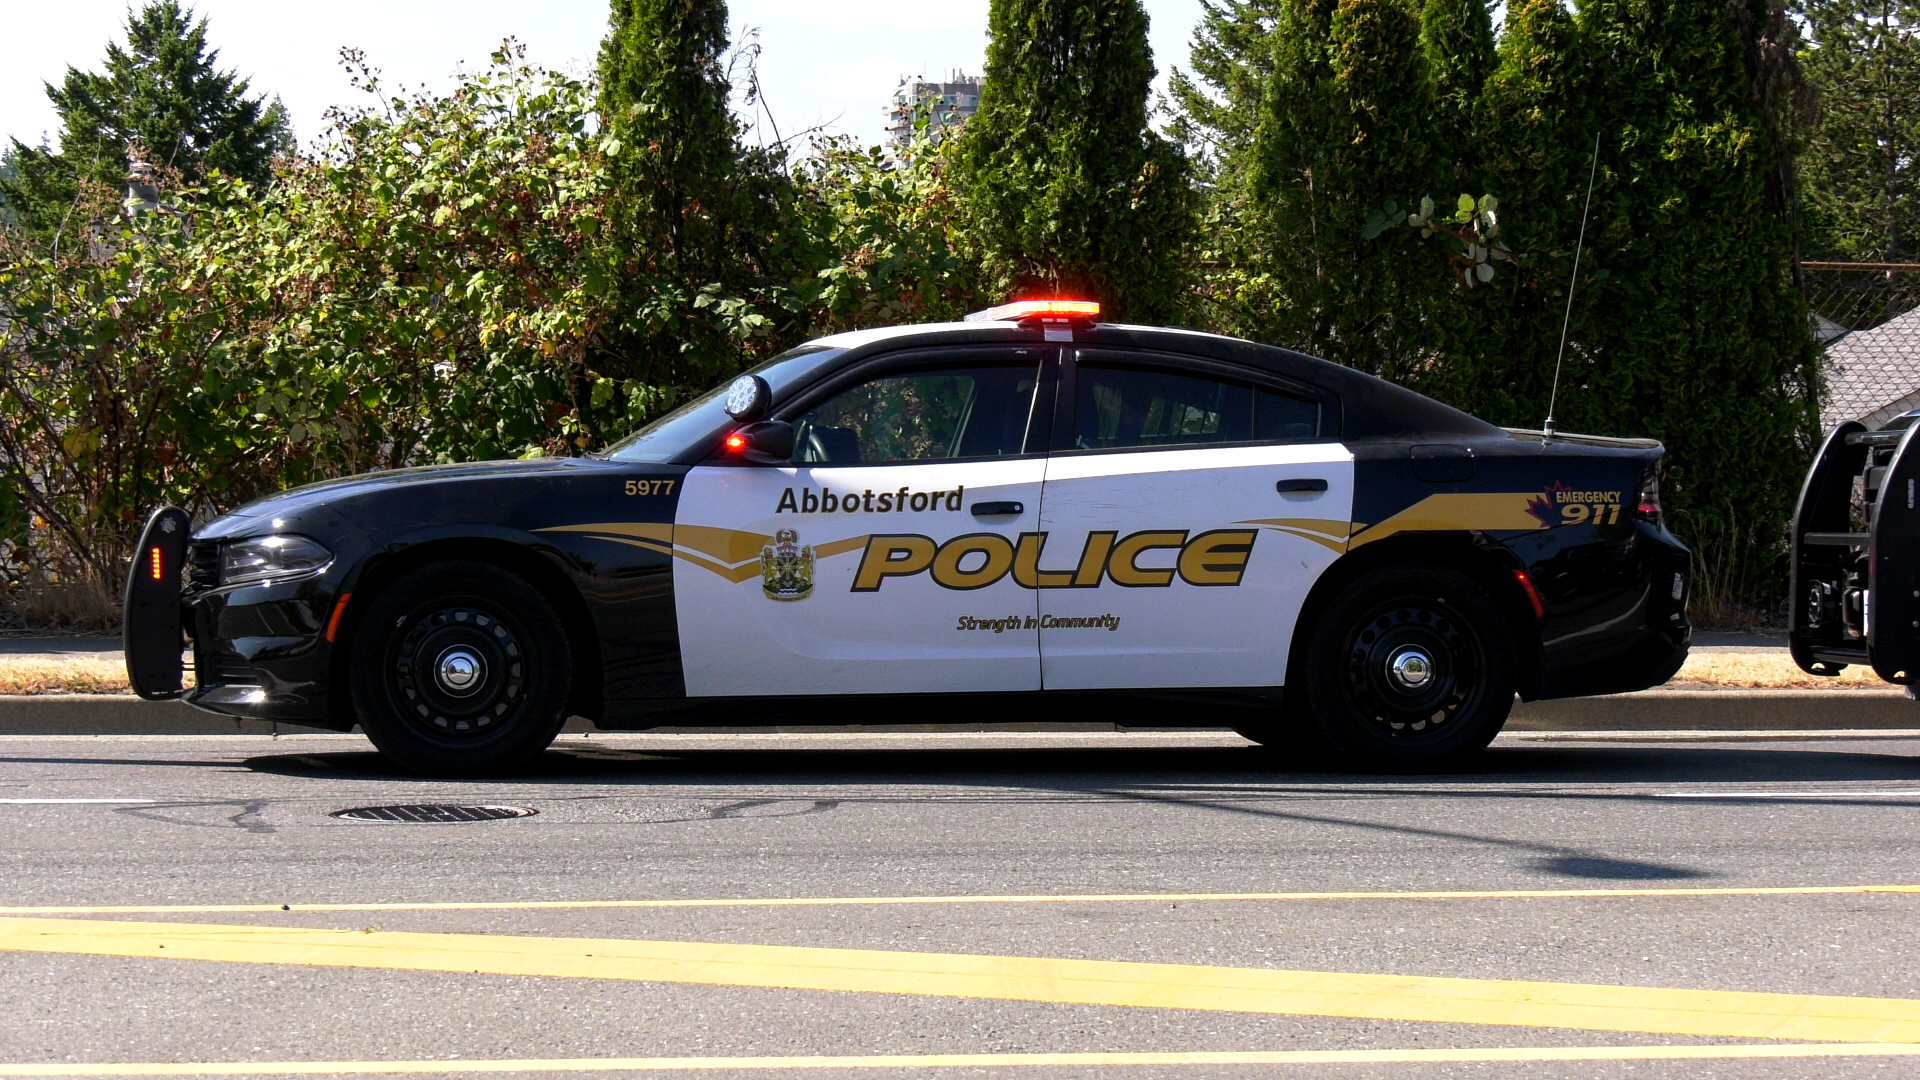 An Abbotsford Police Department cruiser is shown in July 2021. (Jordan Jiang / CTV News Vancouver)